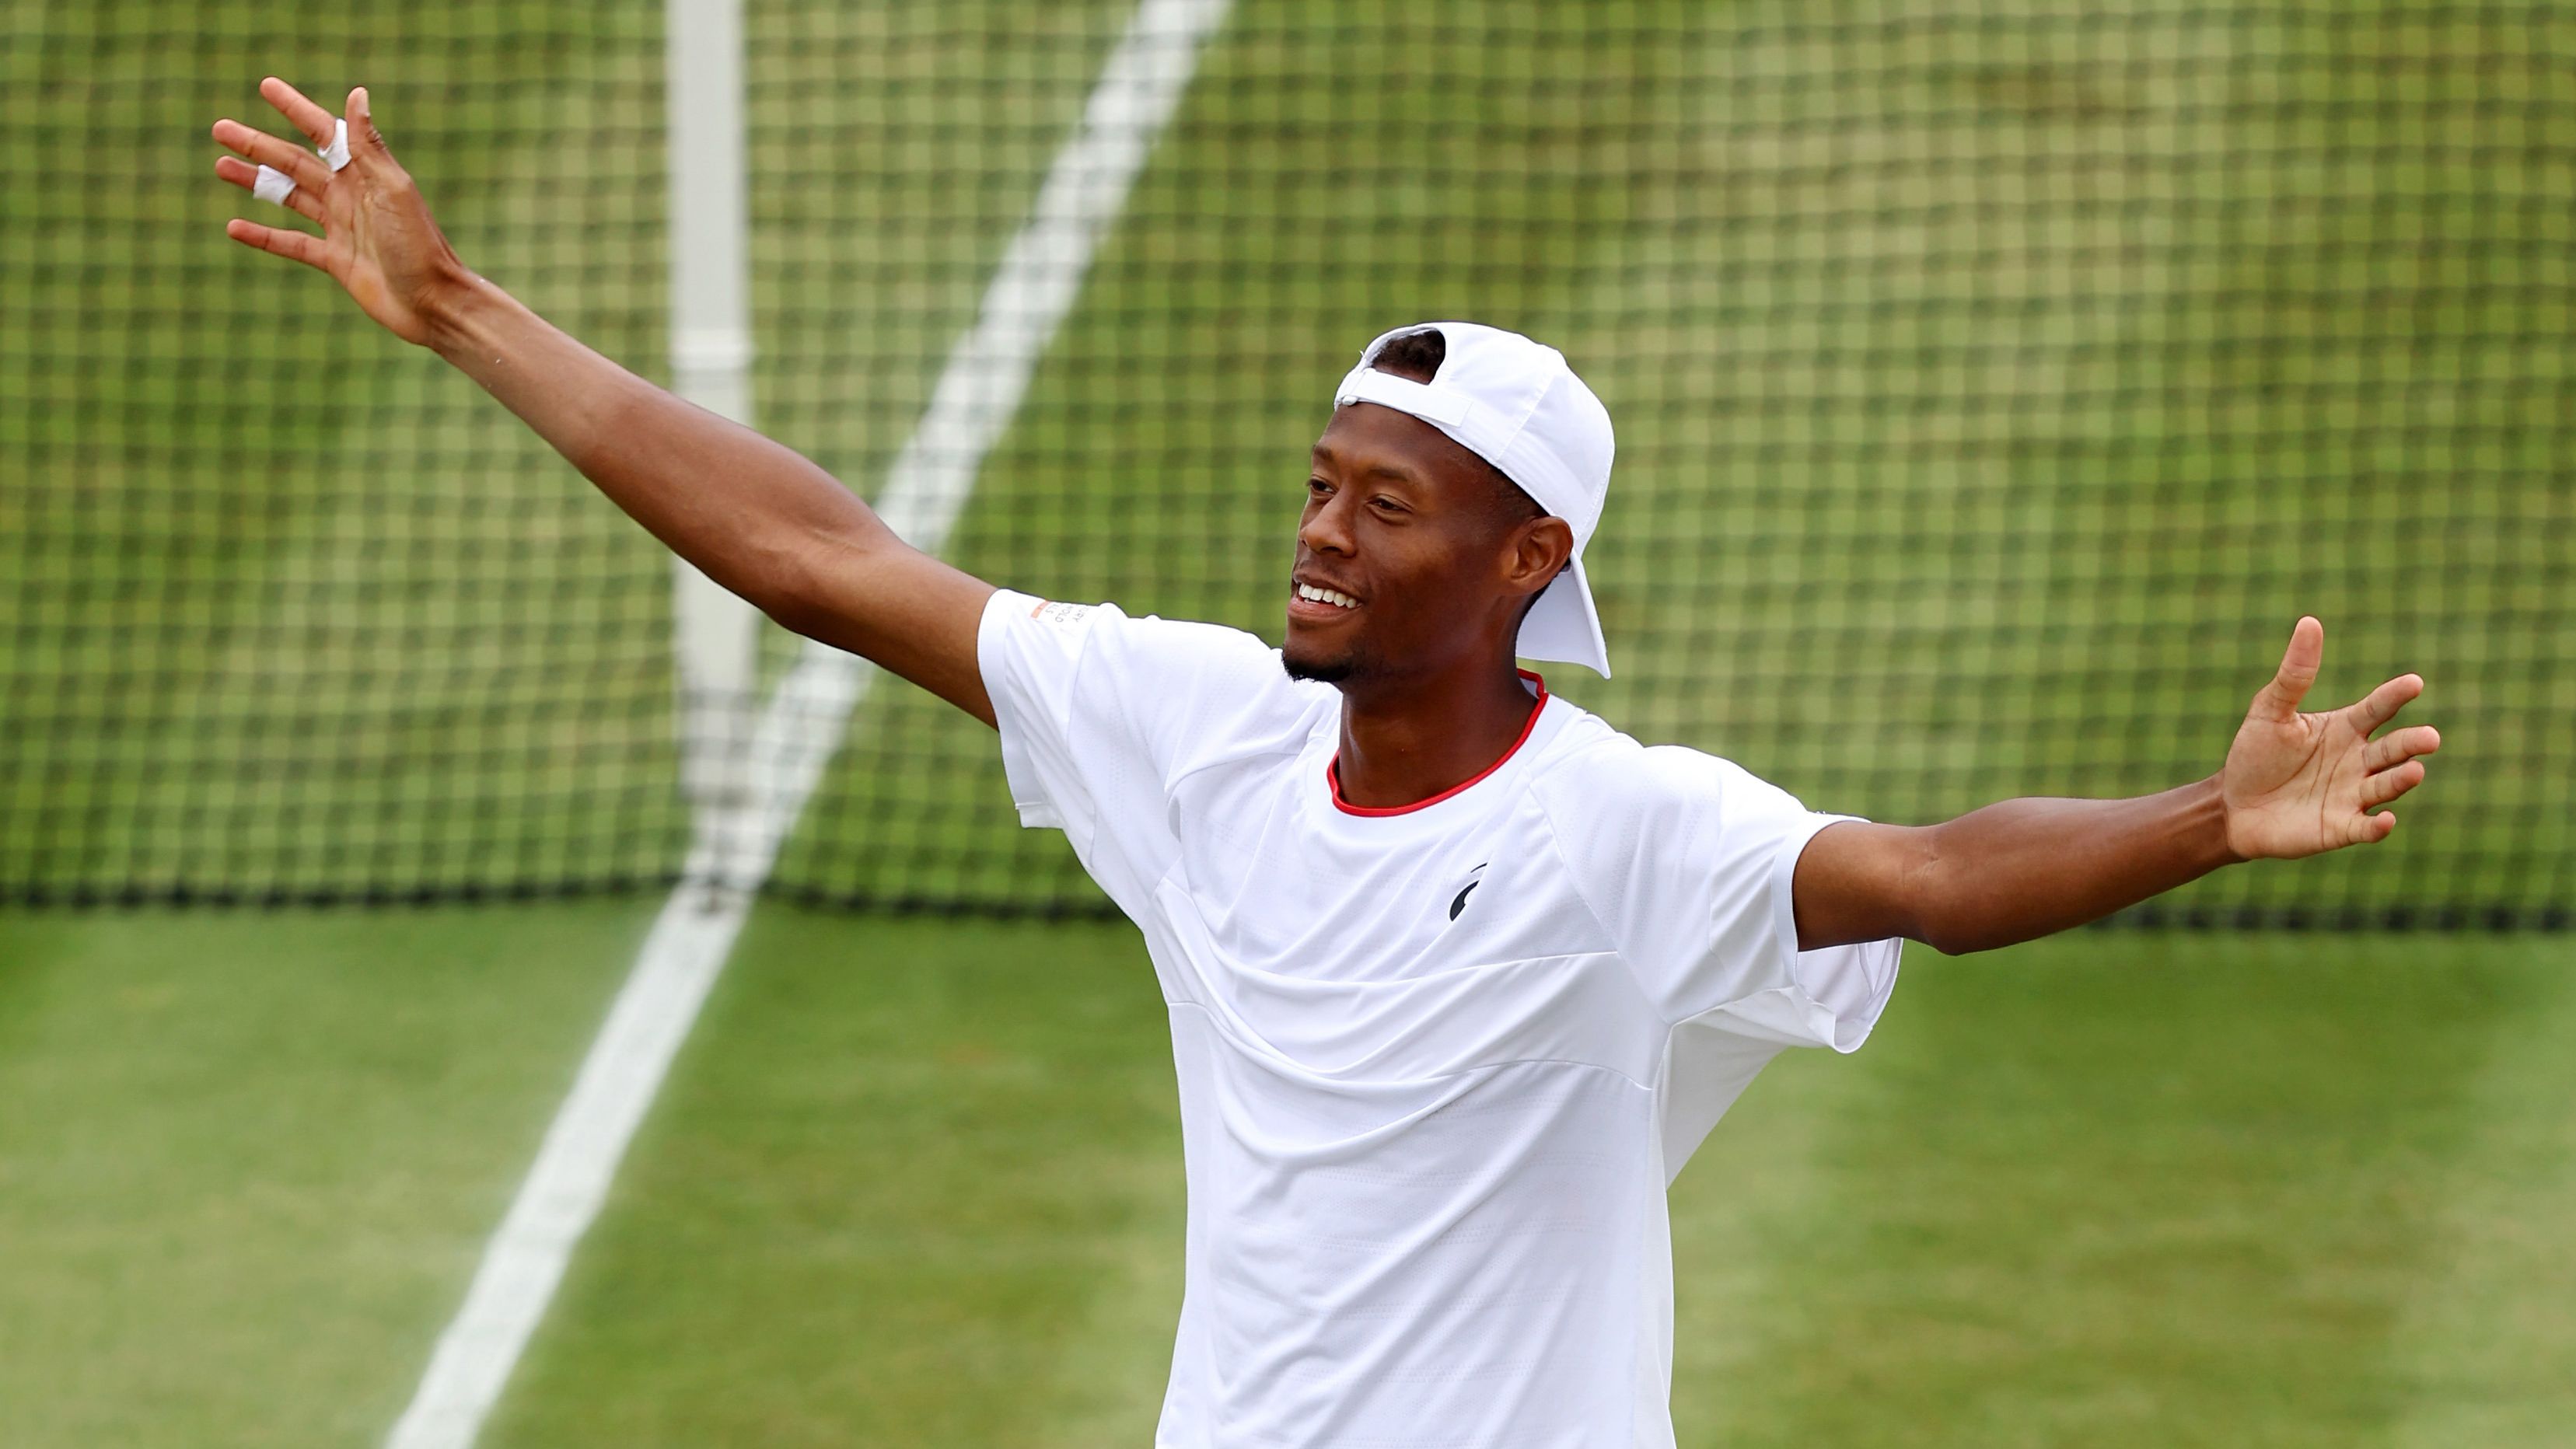 Christopher Eubanks of the United States celebrates victory against Stefanos Tsitsipas of Greece in the fourth round at Wimbledon.